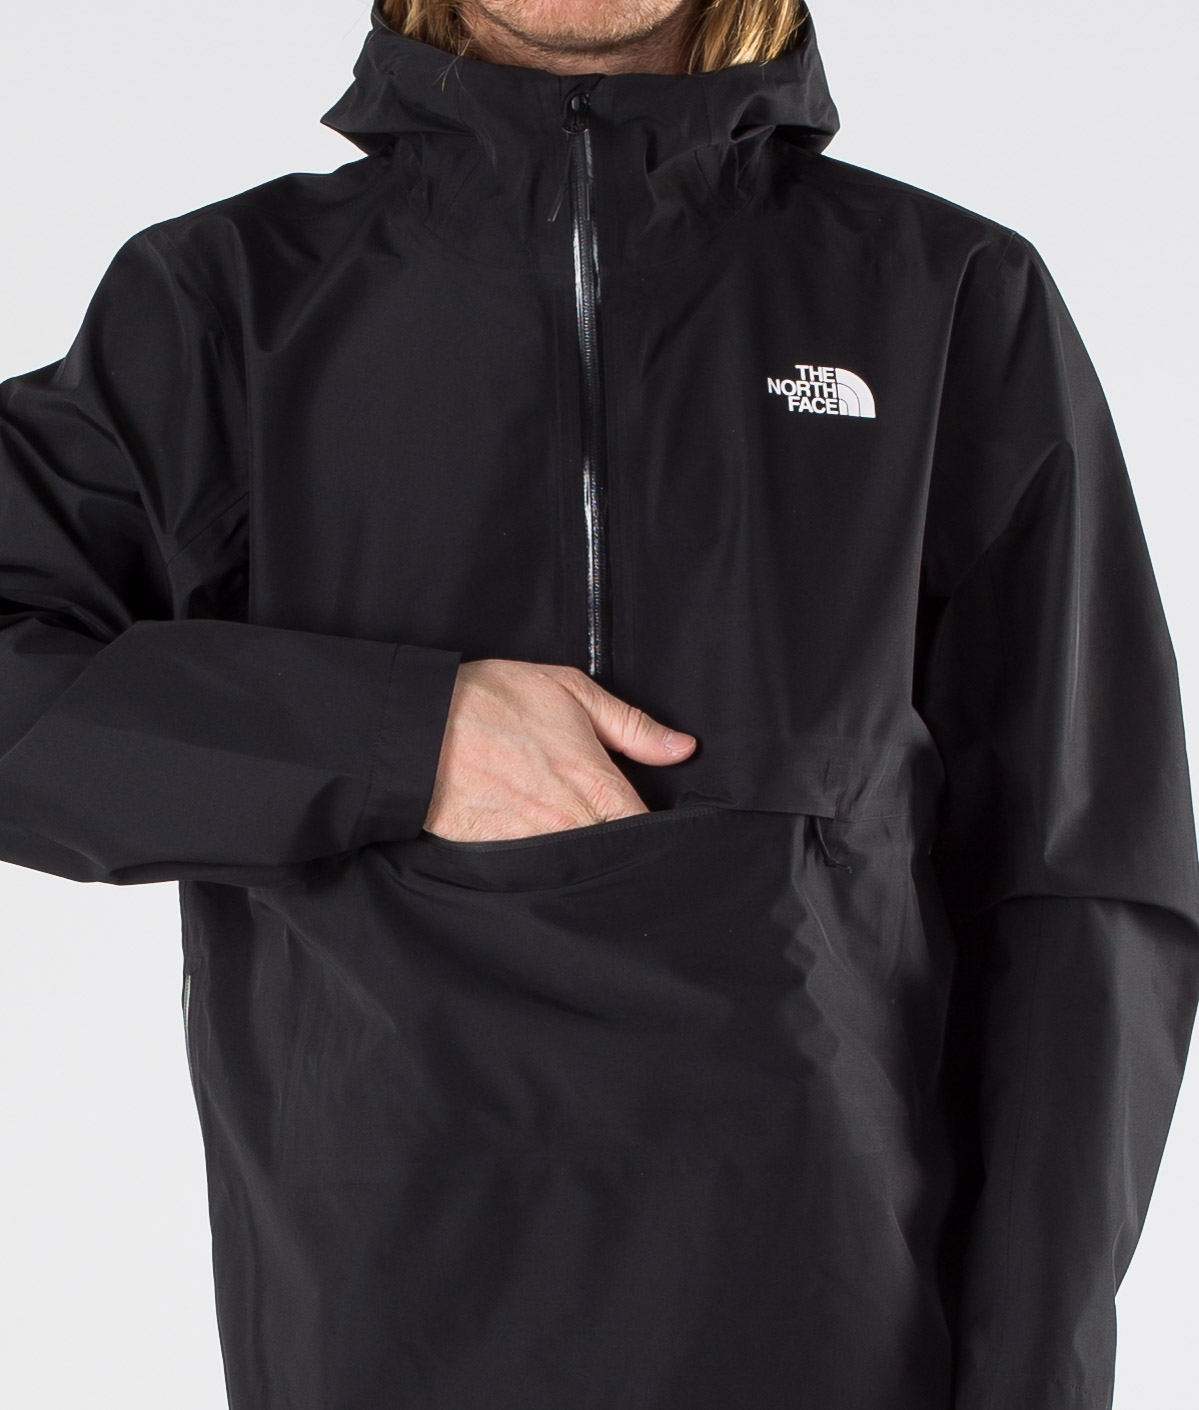 the north face new peak 2.0 jacket